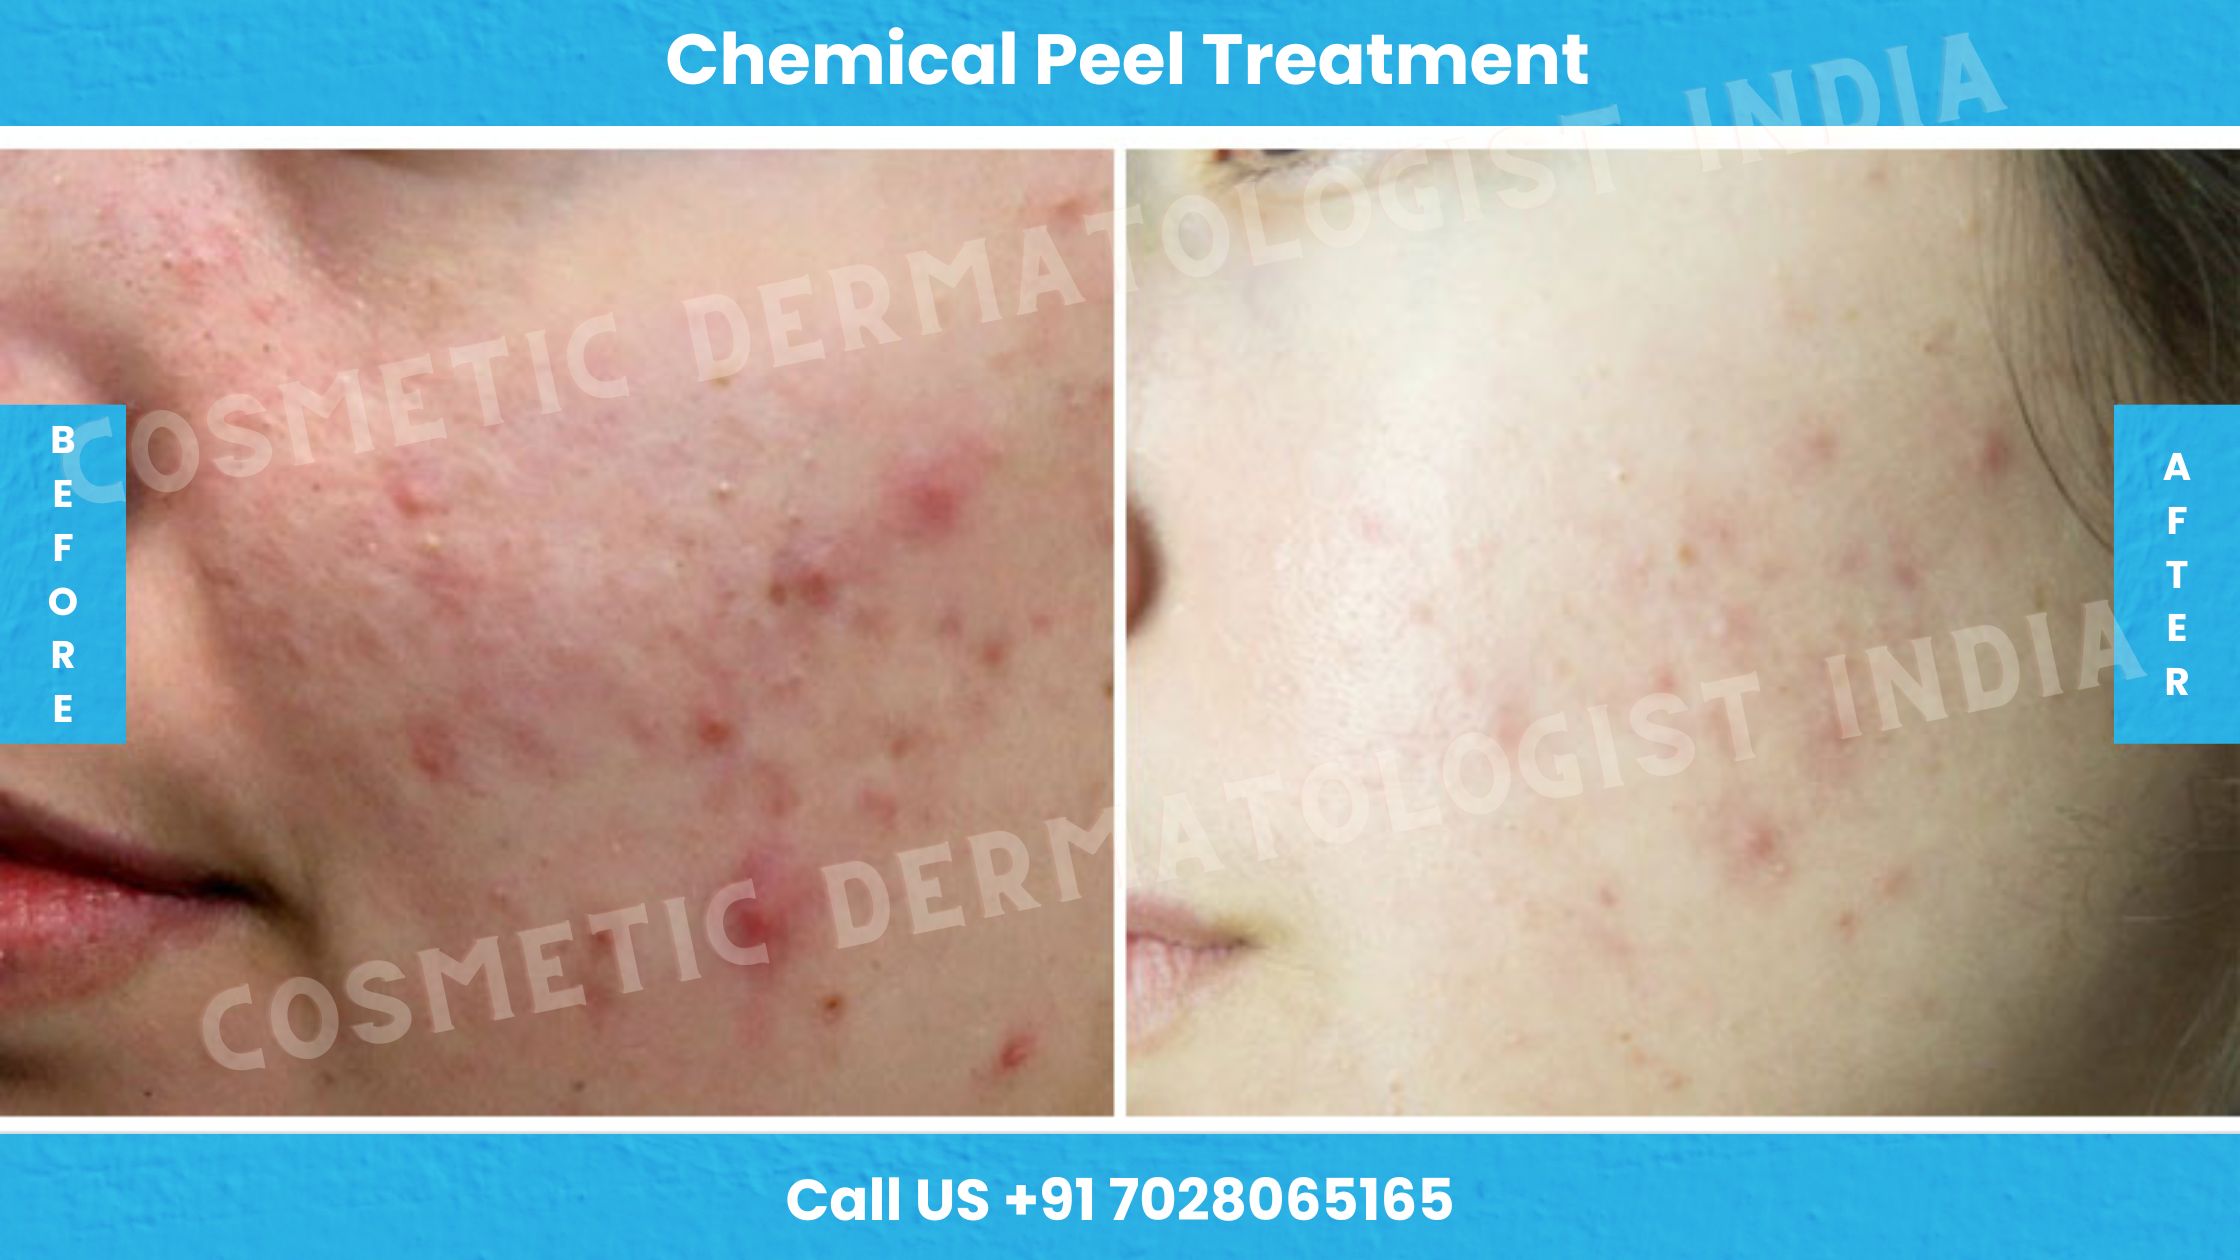 Before and After Images of Chemical Peel Treatment